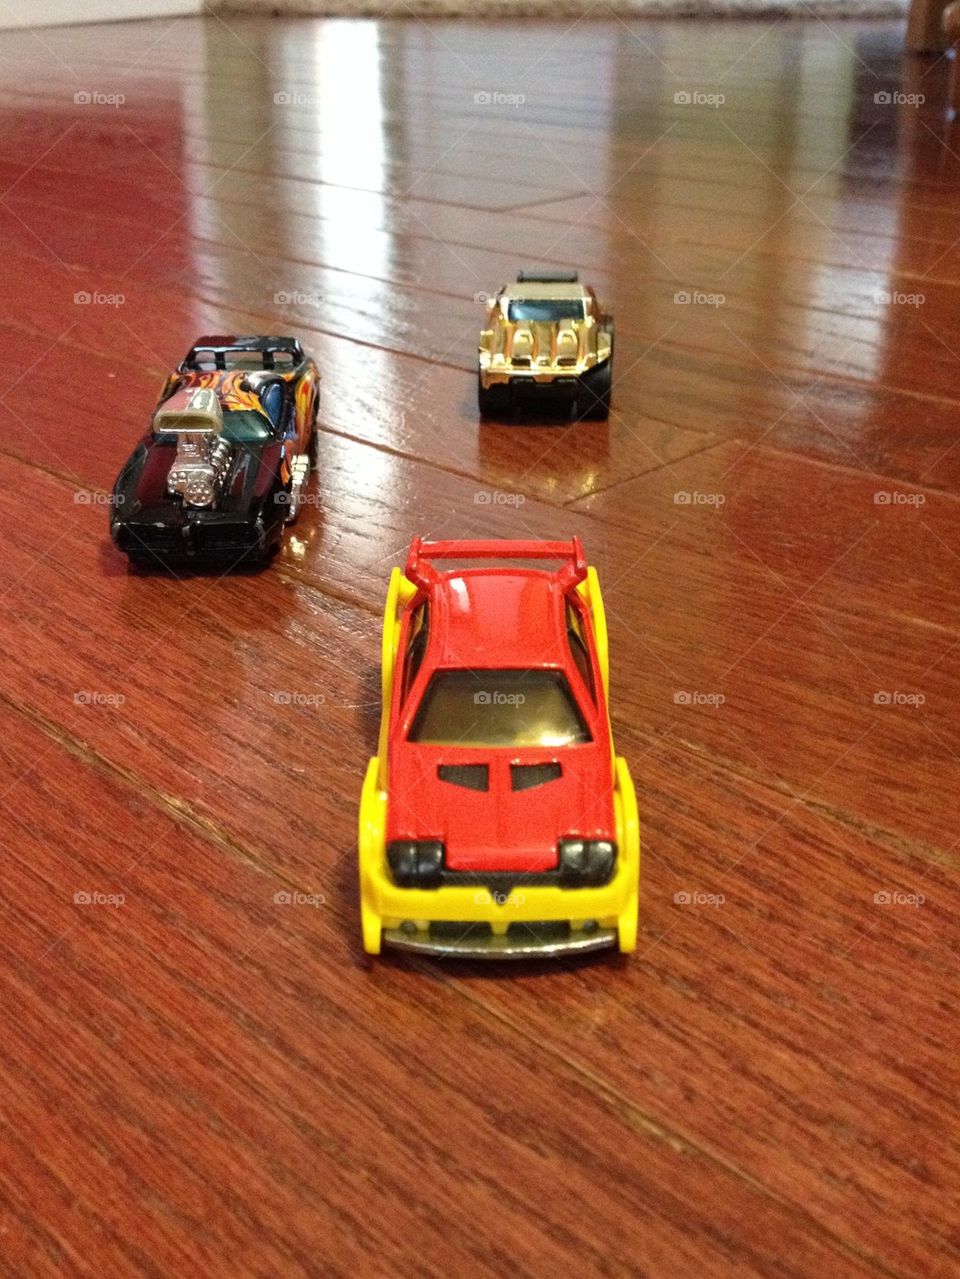 Toy Cars Aligned on Floor 1